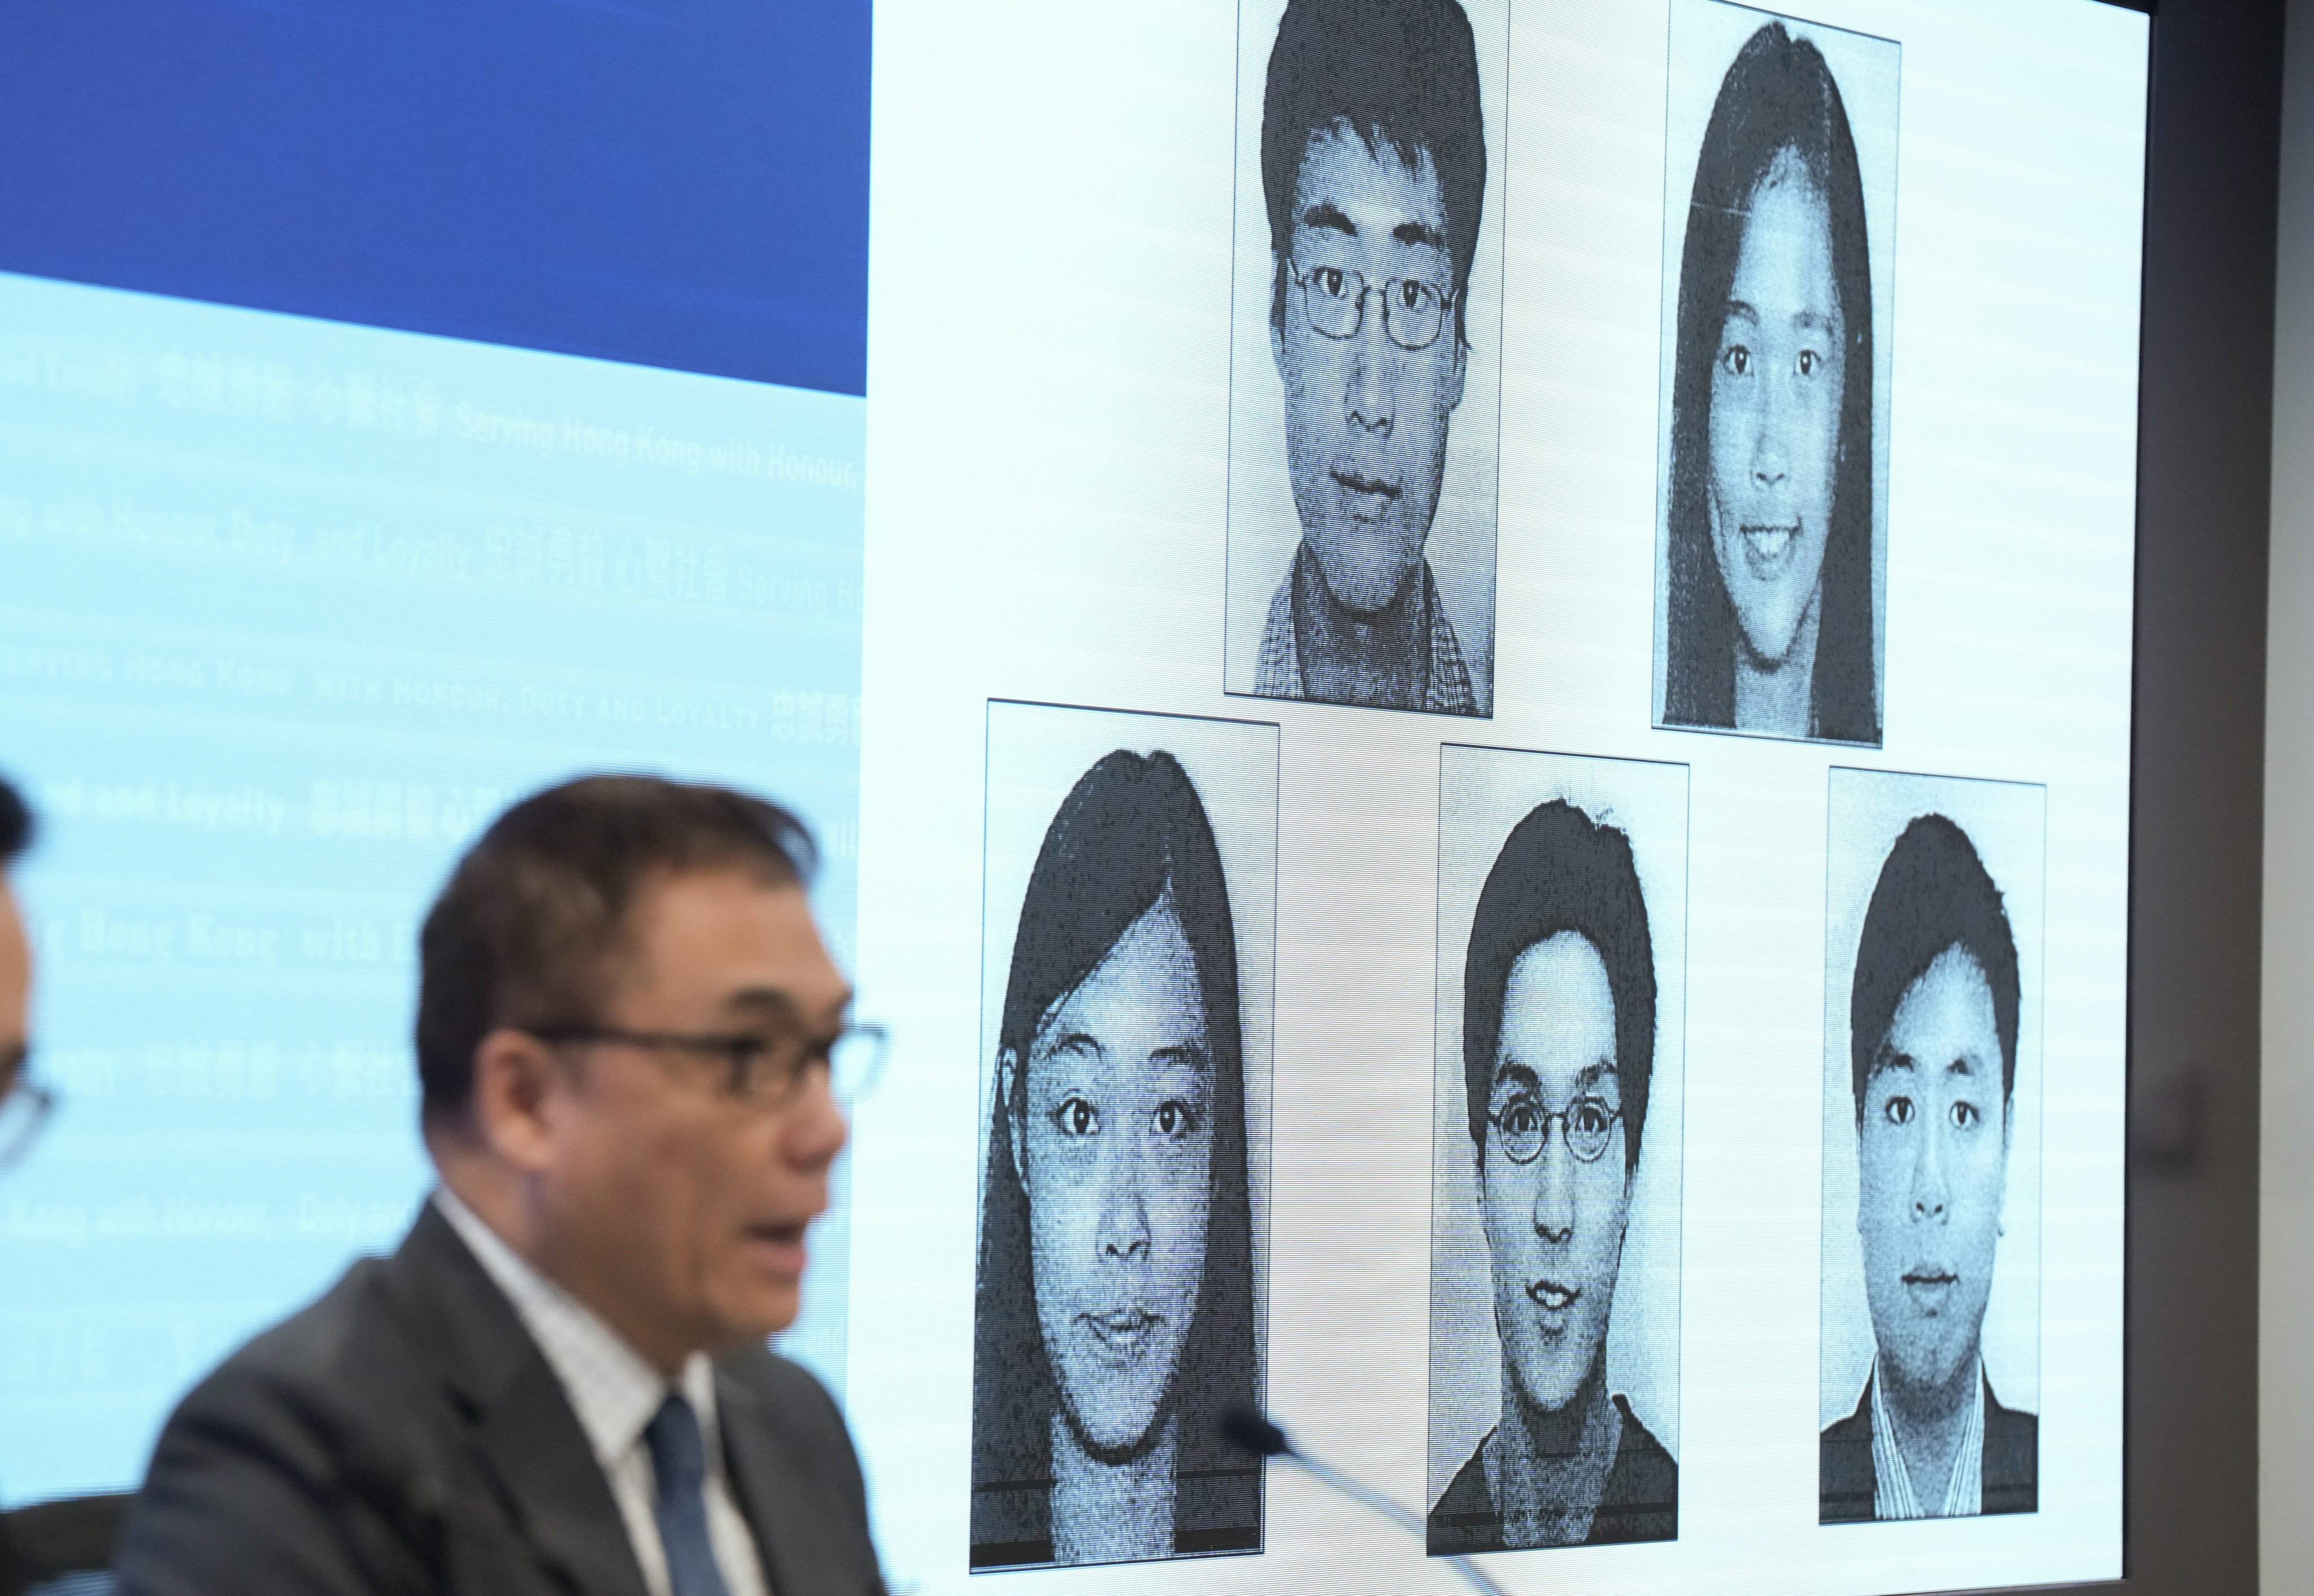 Hong Kong police have offered cash rewards for the arrests of another five fugitives accused of violating the national security law. Photo: Sam Tsang